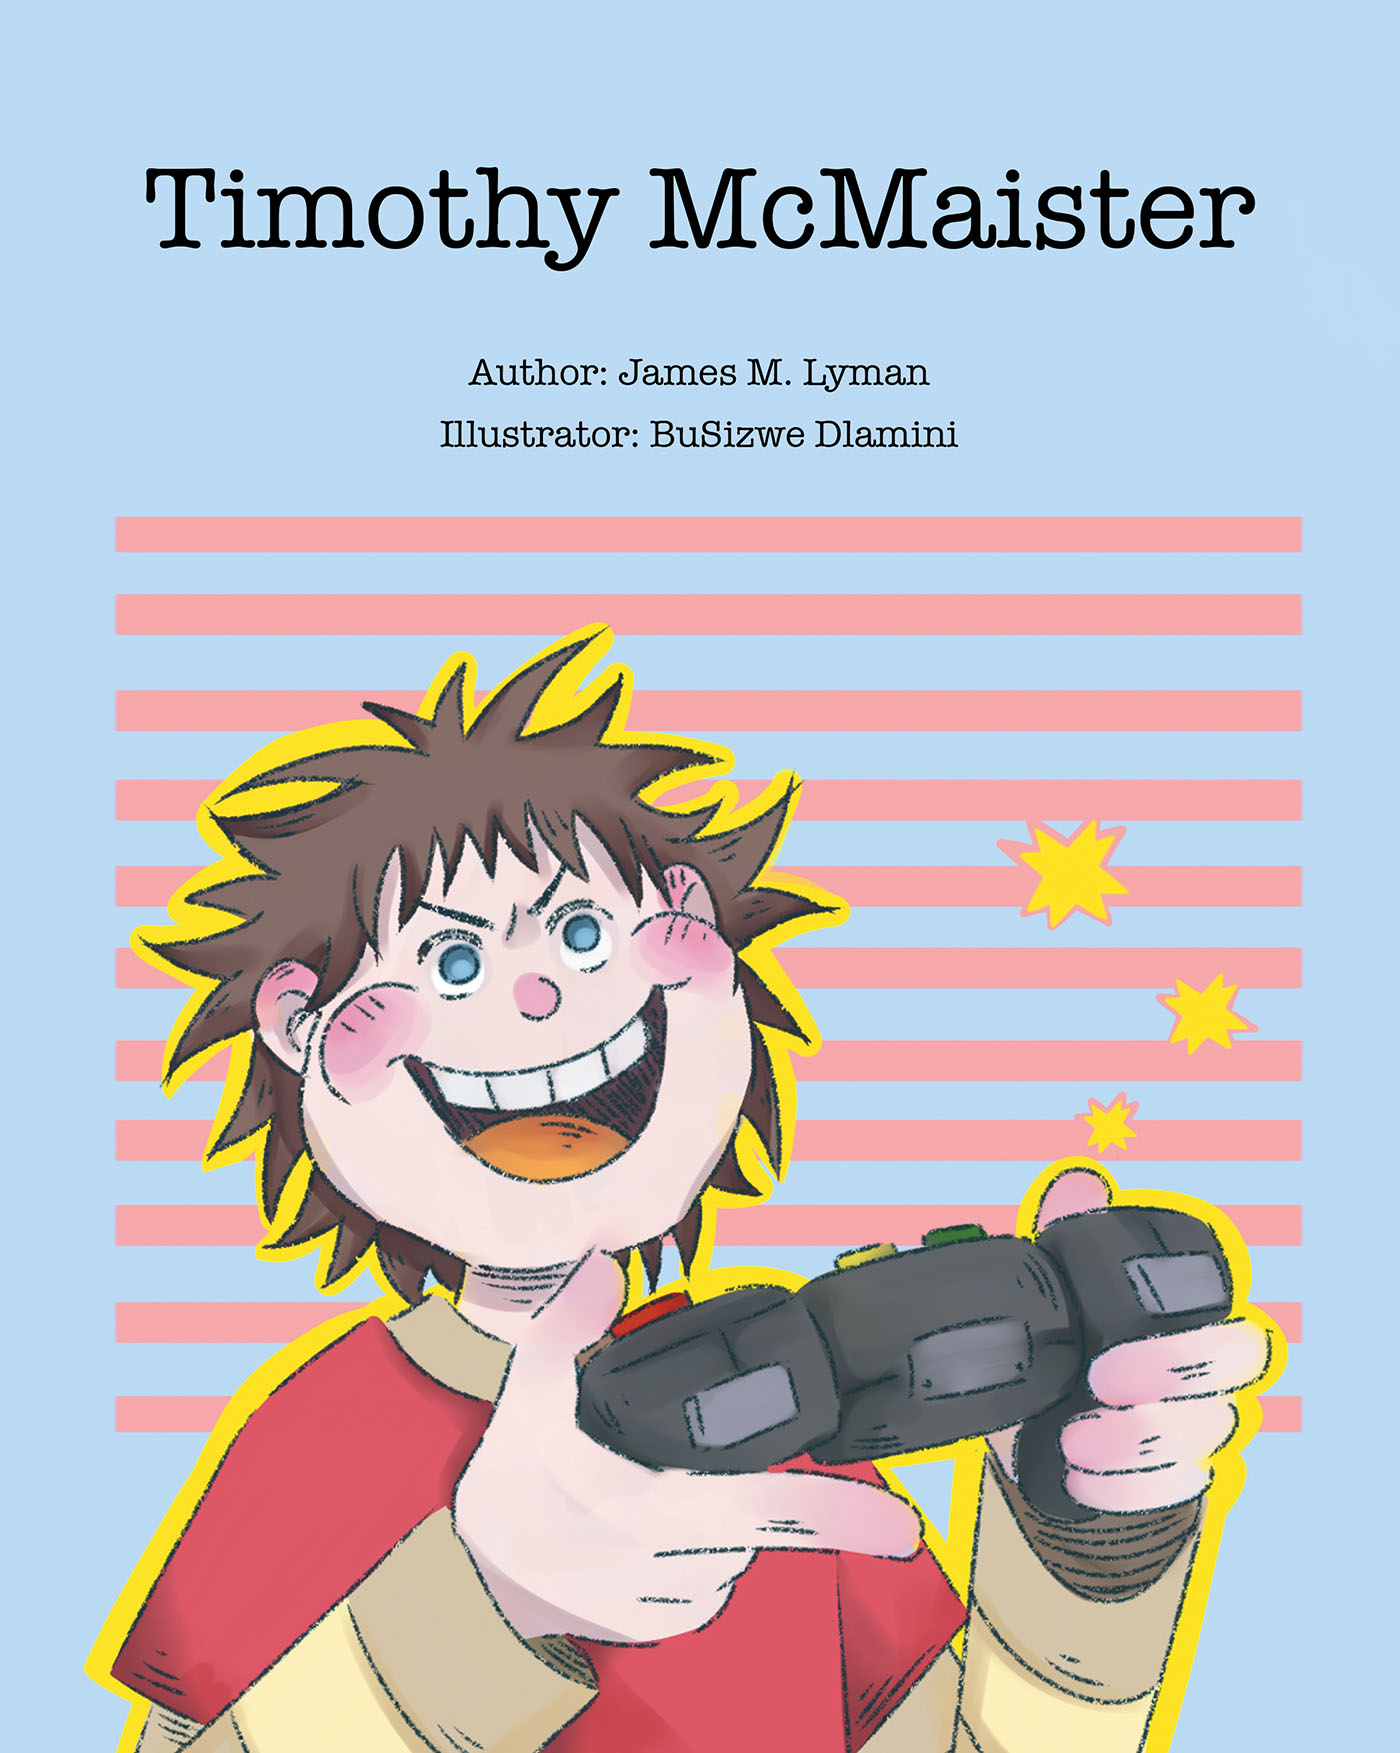 James Lyman’s New Book, "Timothy McMaister," is an Informative, Yet Humorous, Children’s Story Written to Teach Little Ones About the Dangers of Too Much Screen Time